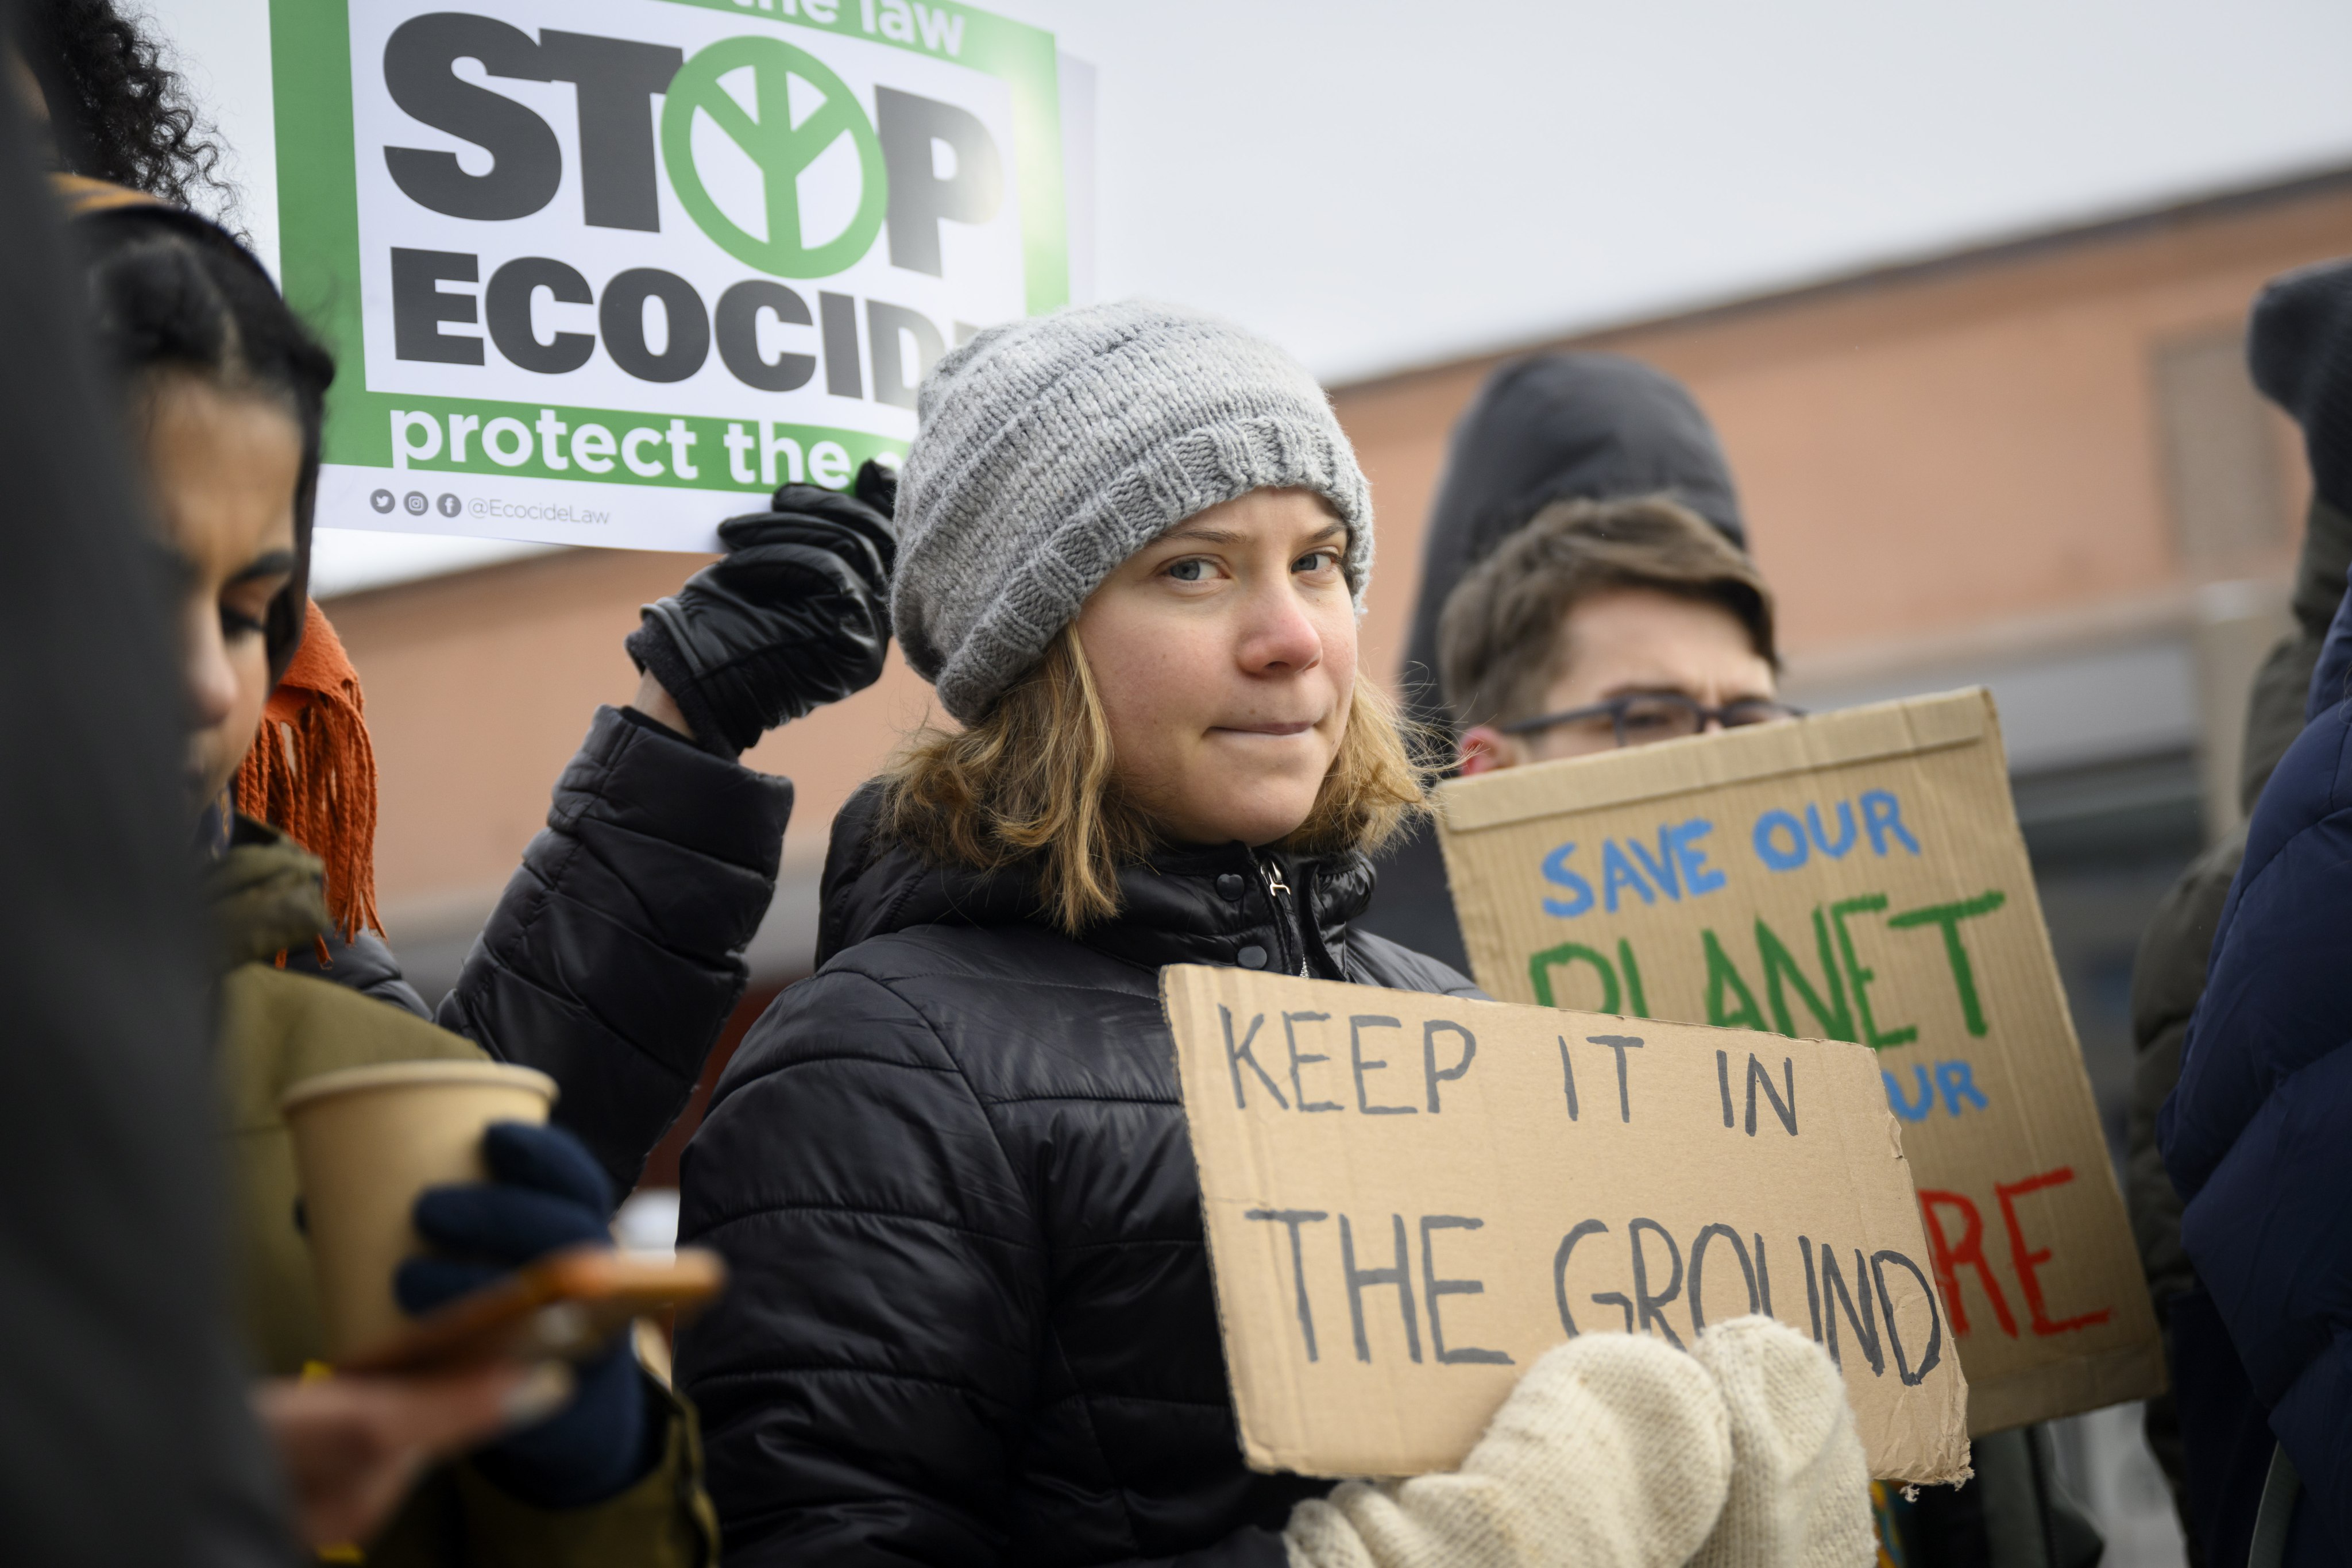 Sweden’s Greta Thunberg and other young climate activists of the “Friday for Future” climate strike movement stage an unauthorised demonstration on the sidelines of the 53rd annual meeting of the World Economic Forum in Davos, Switzerland, on January 20. Photo: EPA-EFE